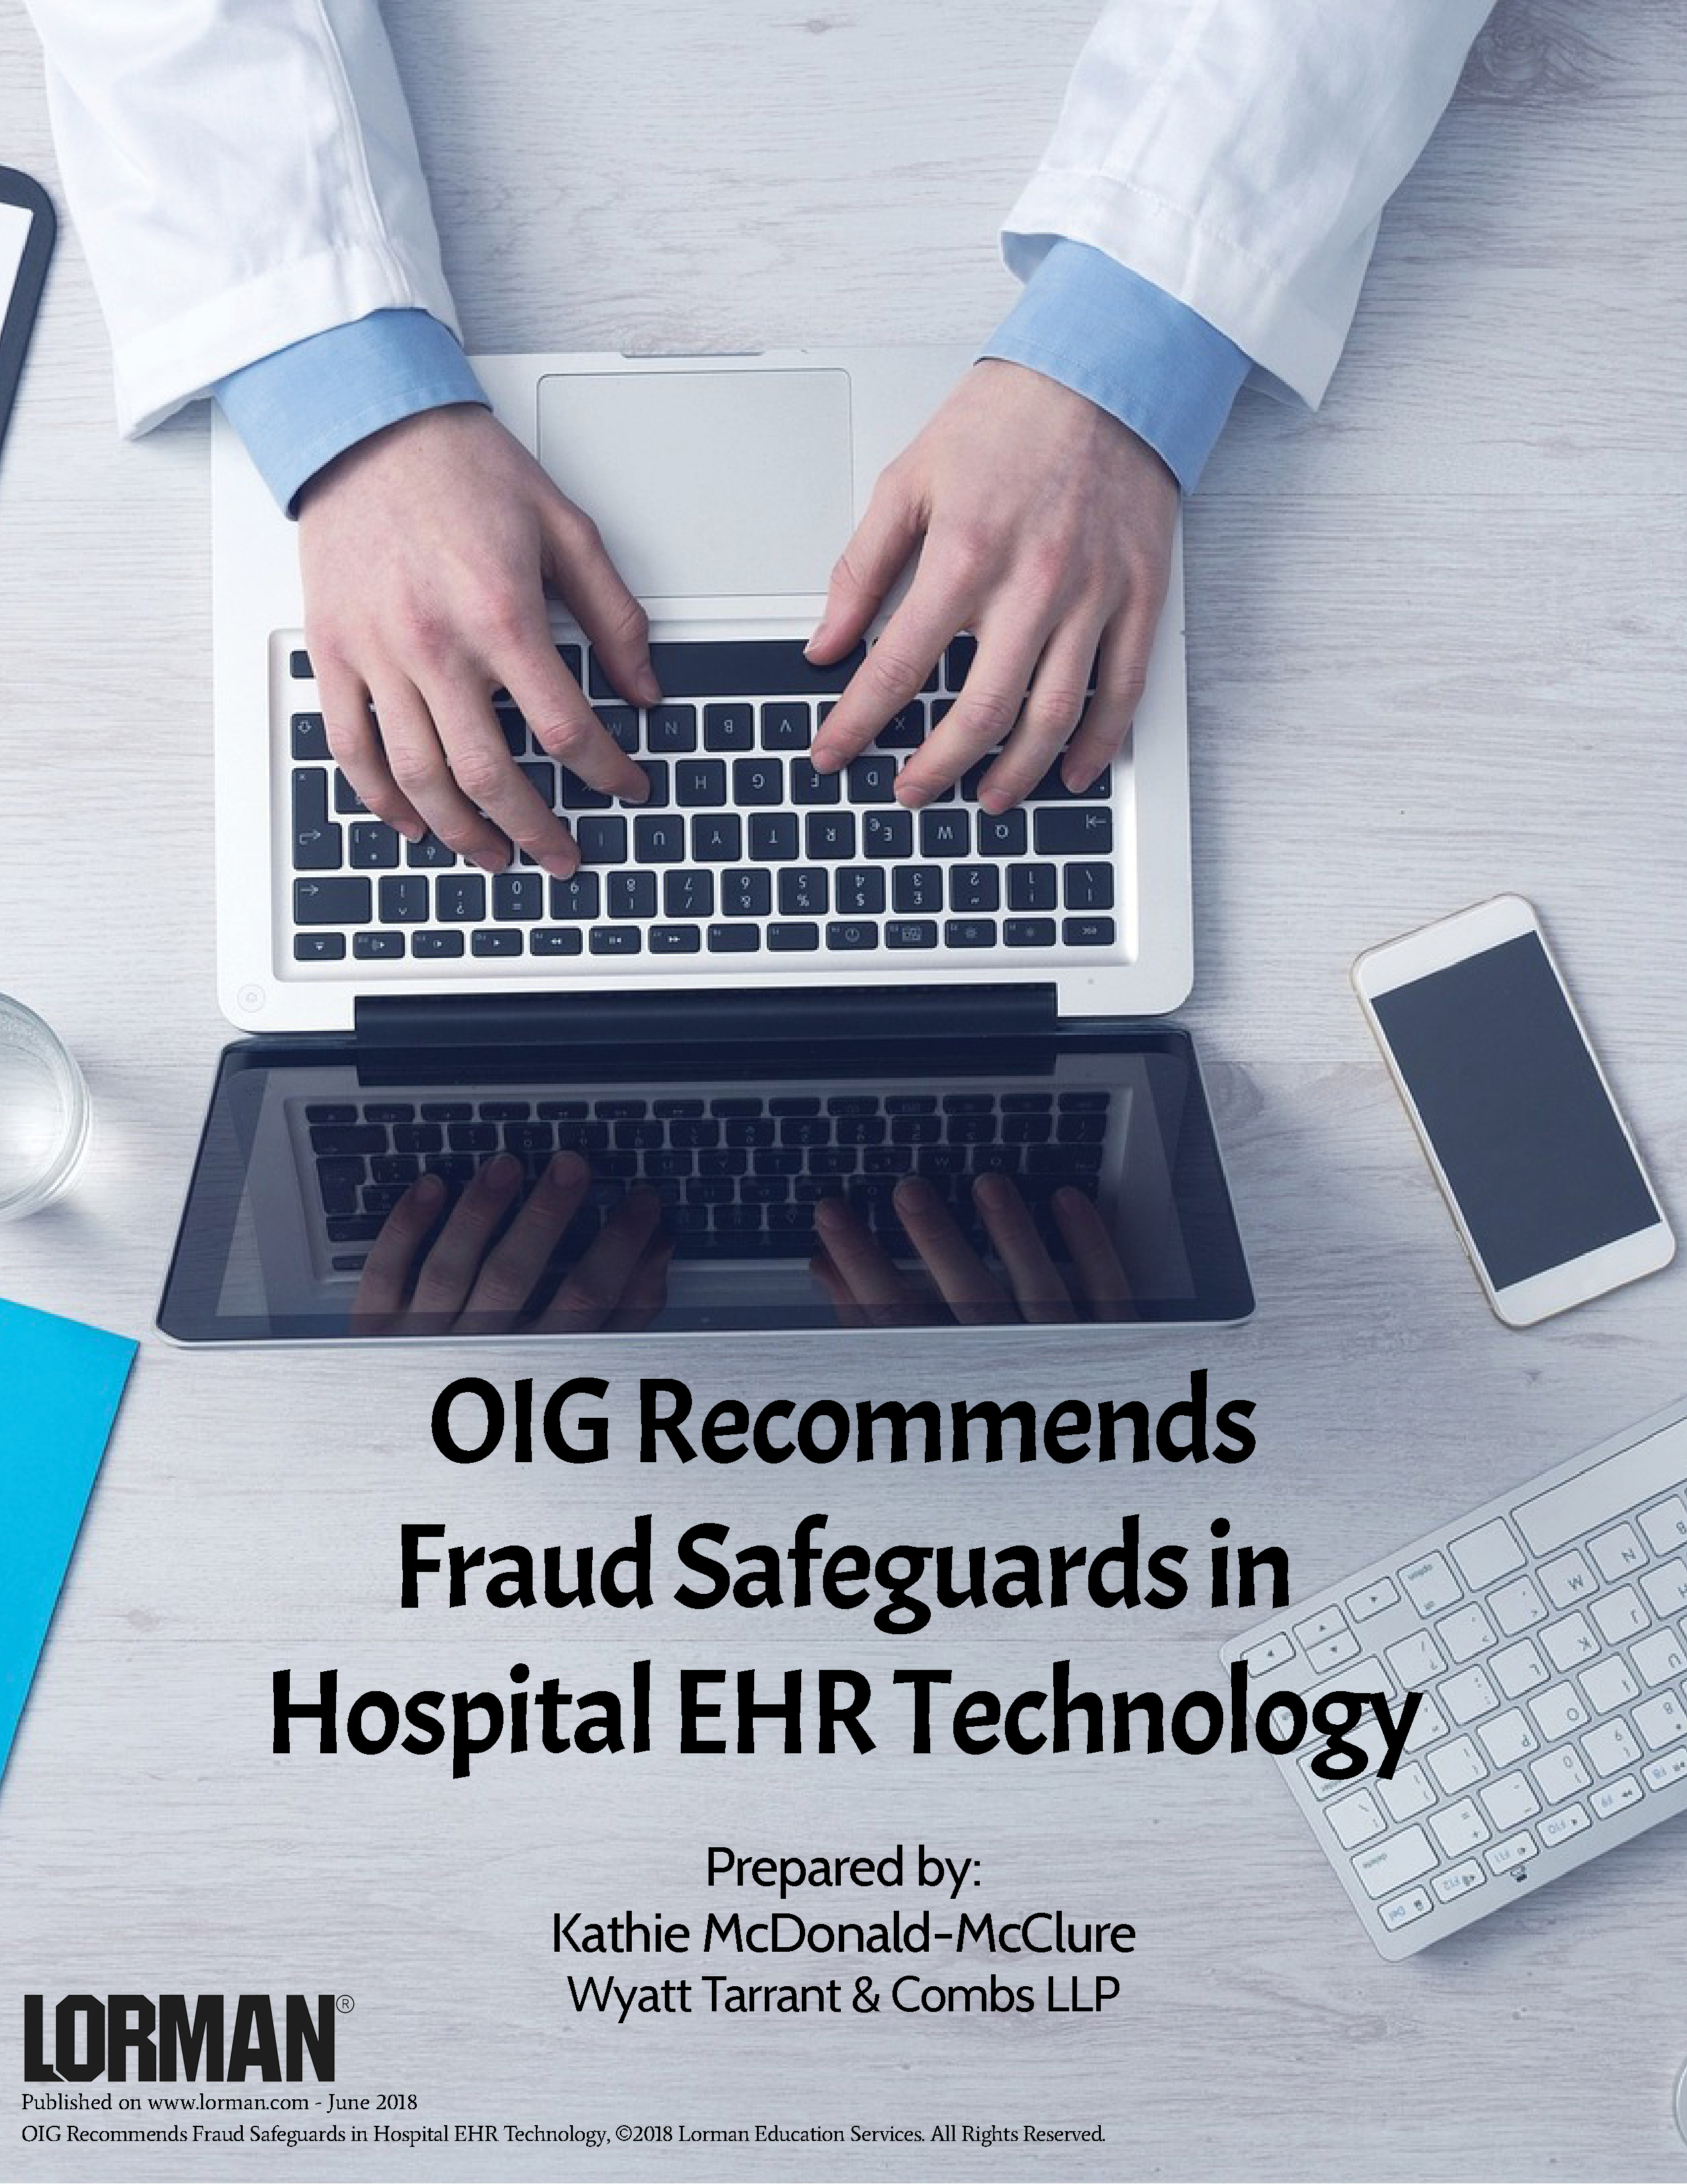 OIG Recommends Fraud Safeguards in Hospital EHR Technology